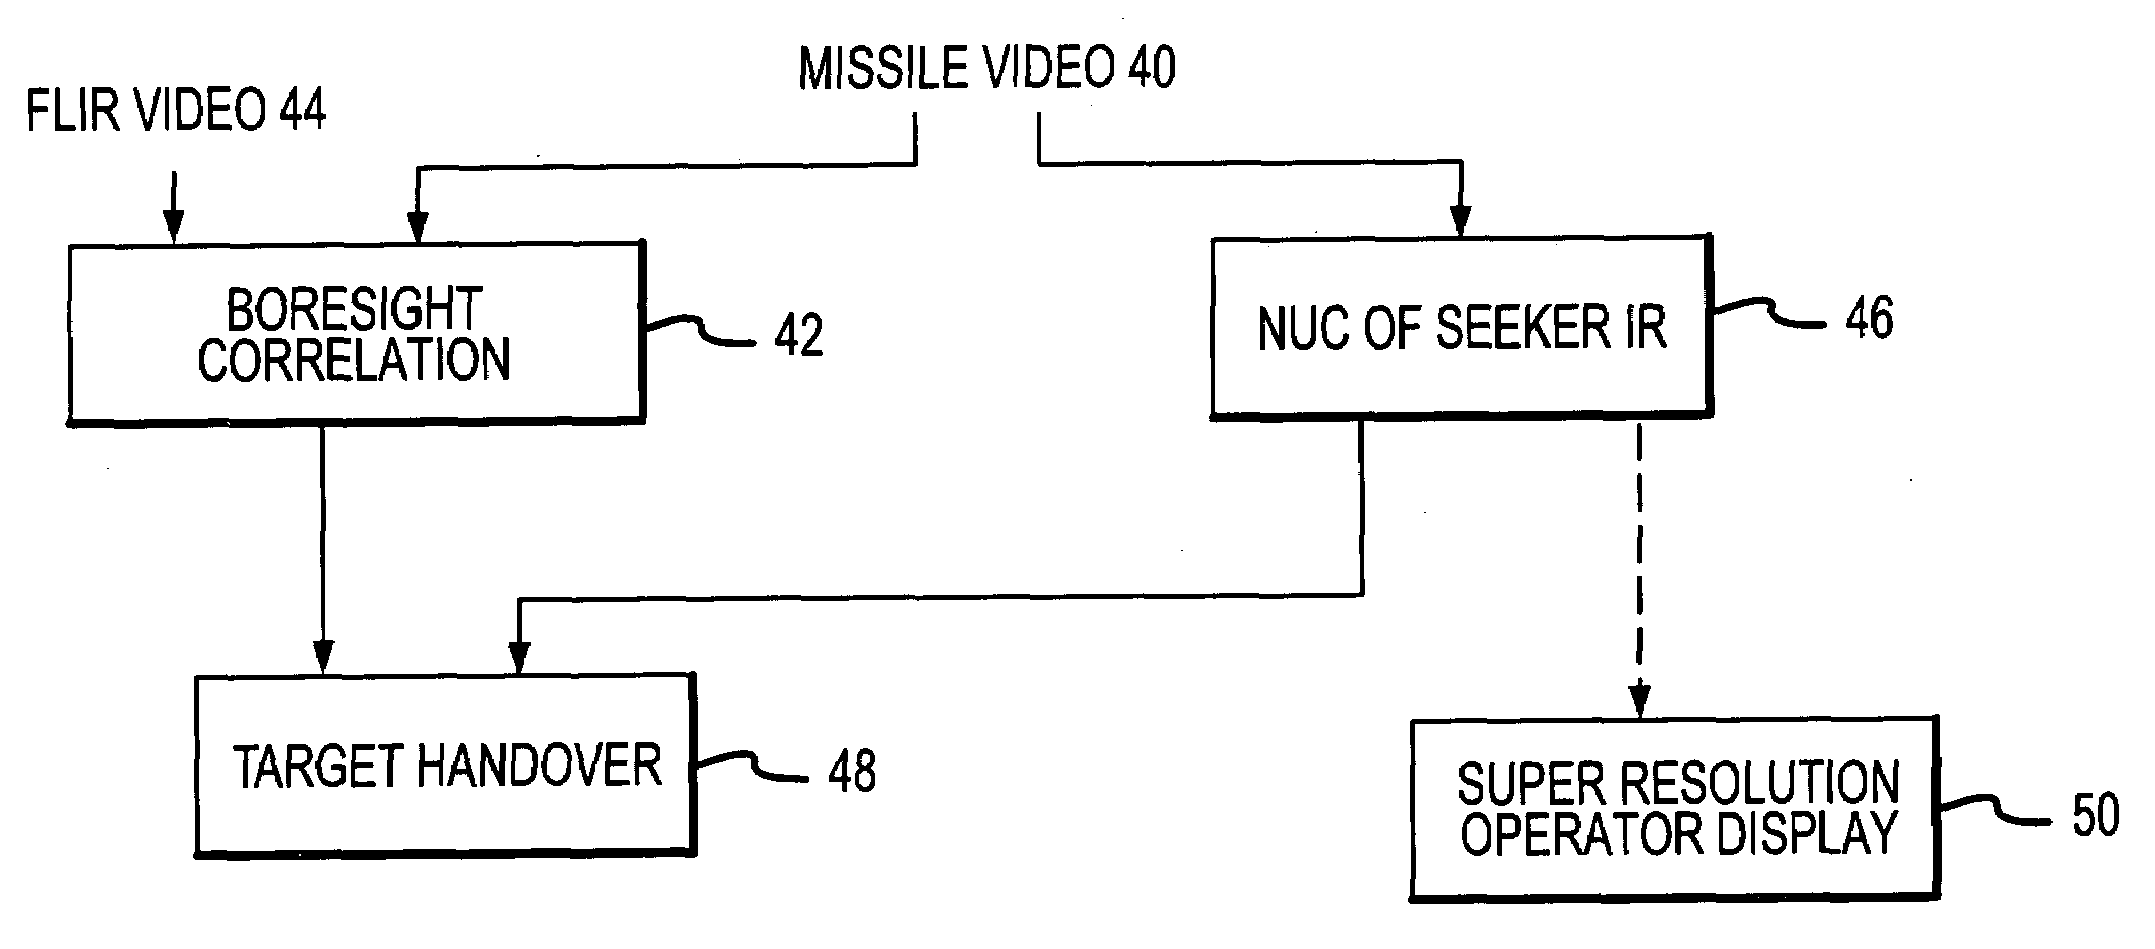 FLIR-to-missile boresight correlation and non-uniformity compensation of the missile seeker